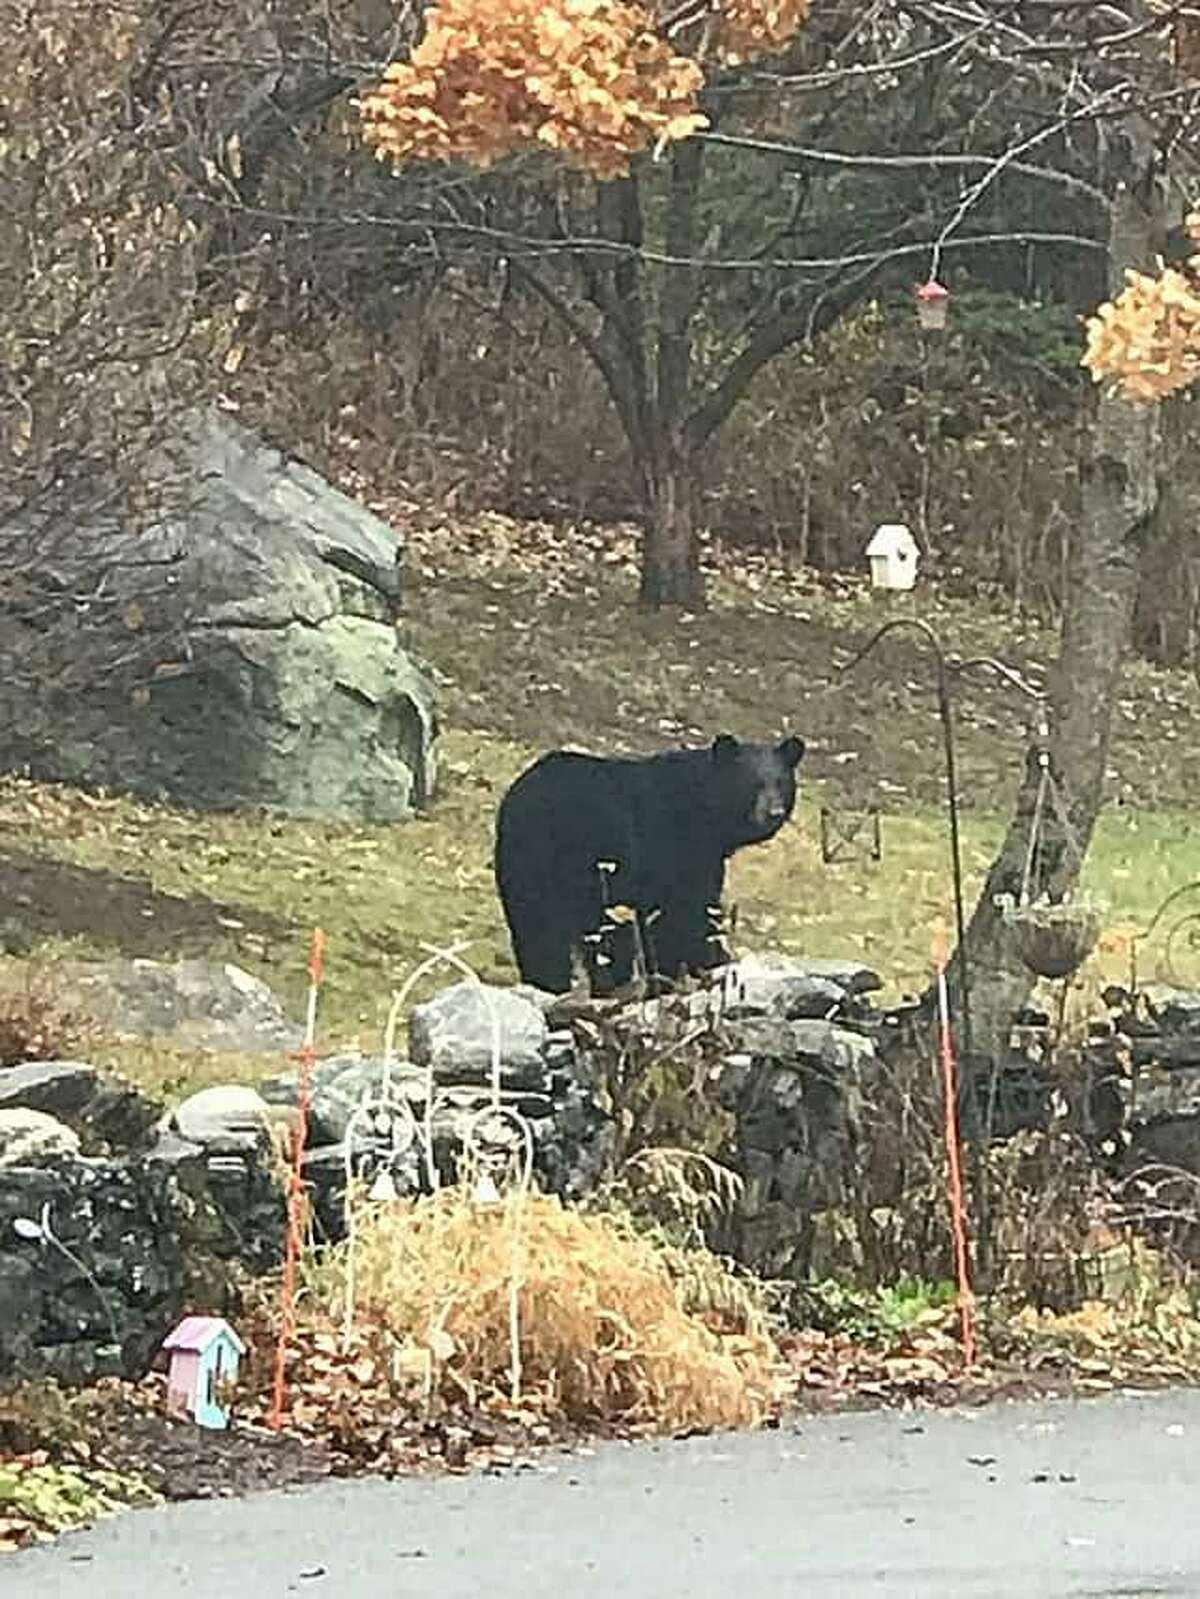 Bear sightings in Connecticut